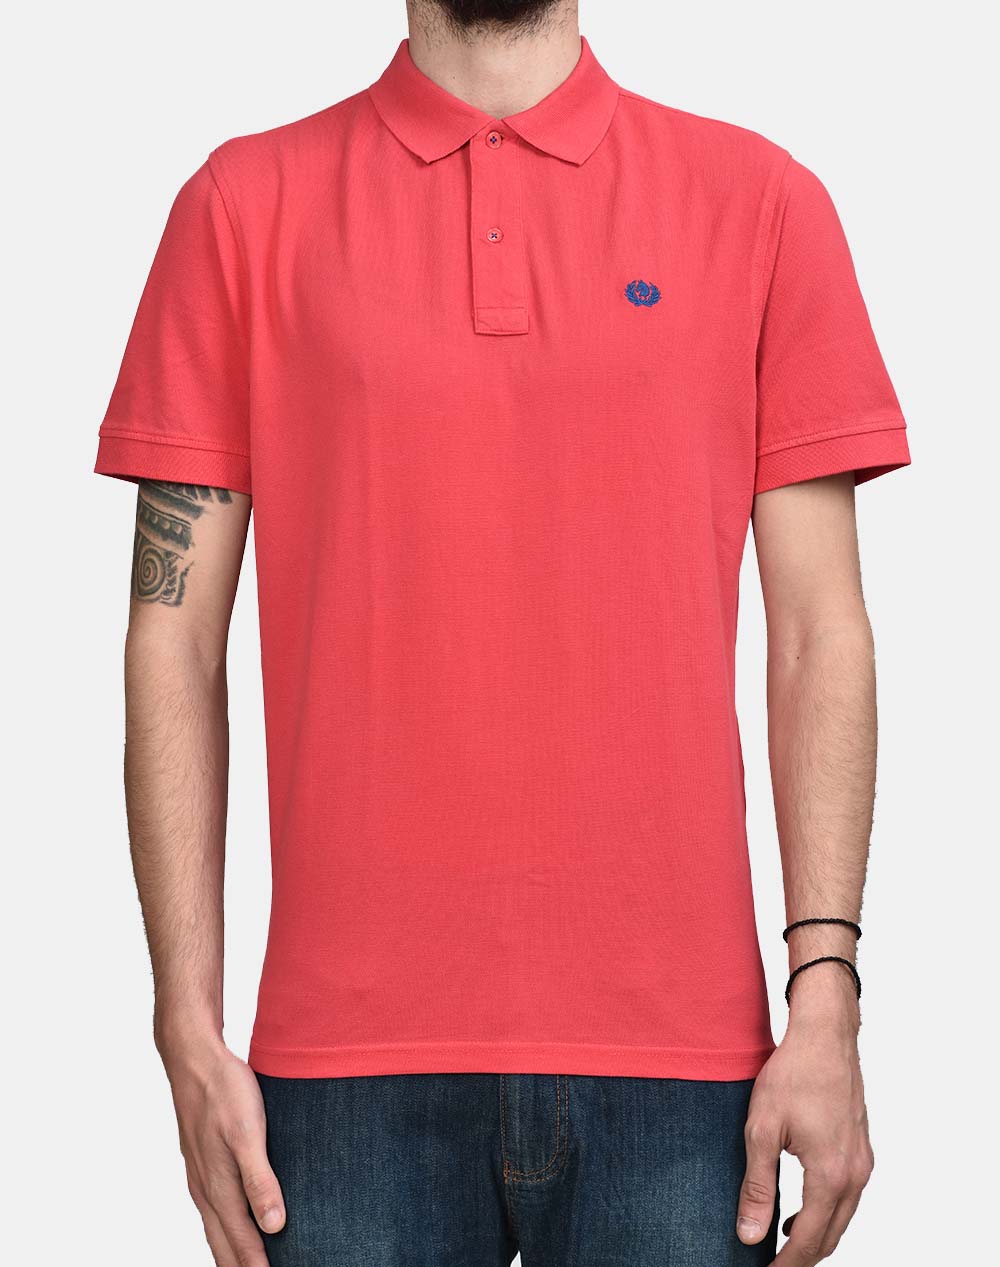 ASCOT ΜΠΛΟΥΖΑ POLO 15388350-23 Red 3420AASCO3410056_9139